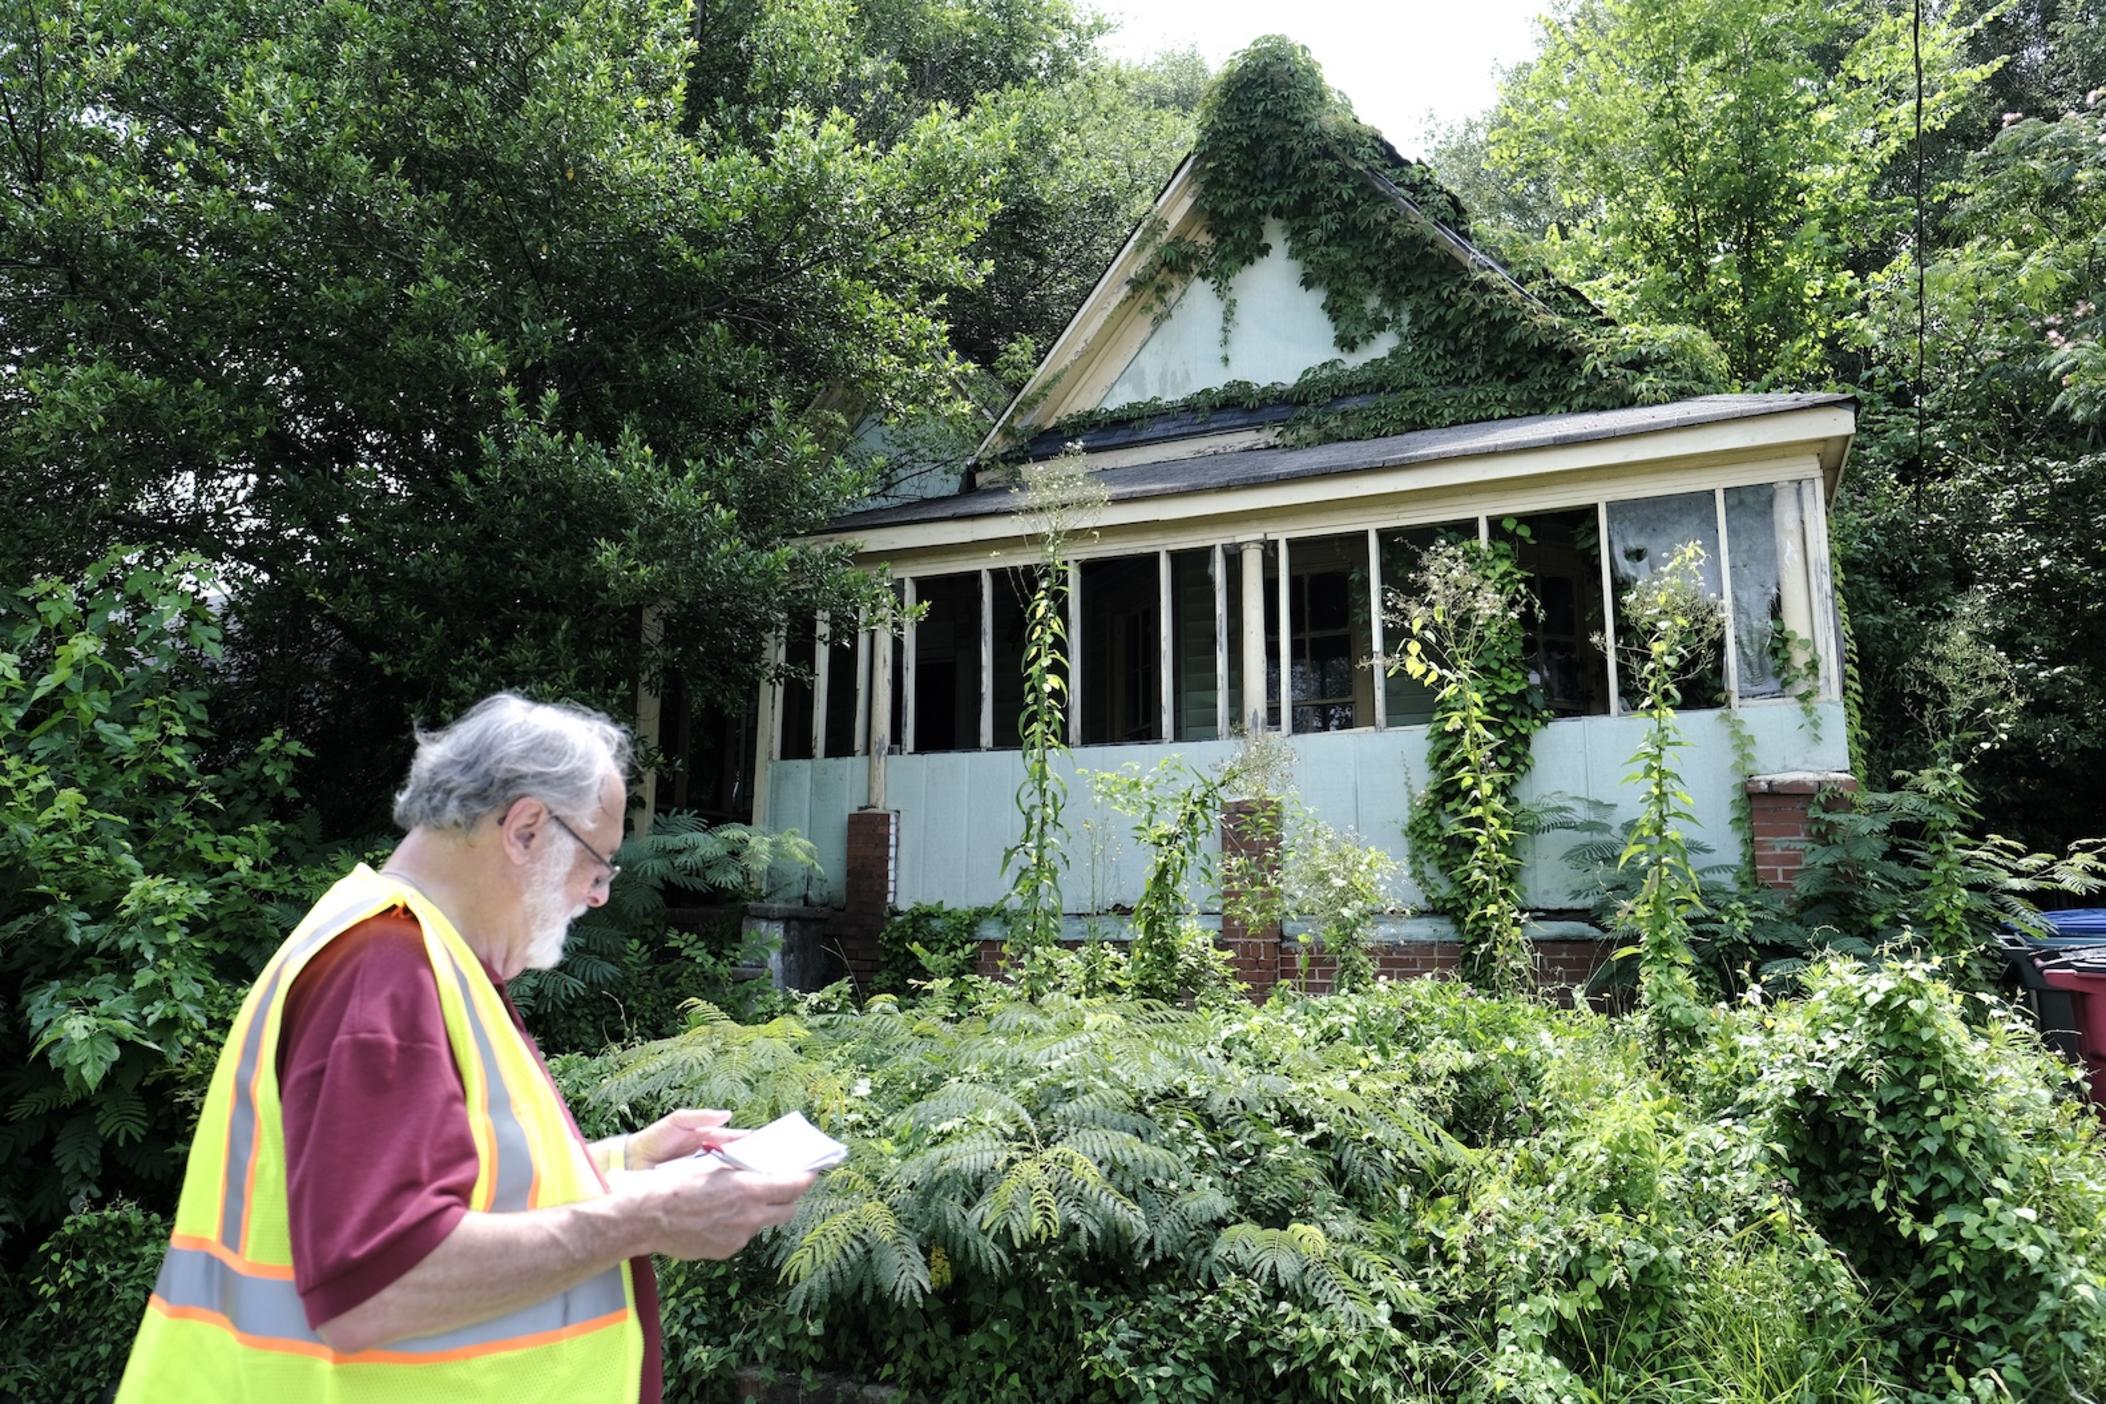 Community volunteer Friar Steven Pavignan fills out a safety survey for a blighted house in the Pleasant Hill neighborhood for the Safe by Design project on June 24, 2023, in Macon, Ga.